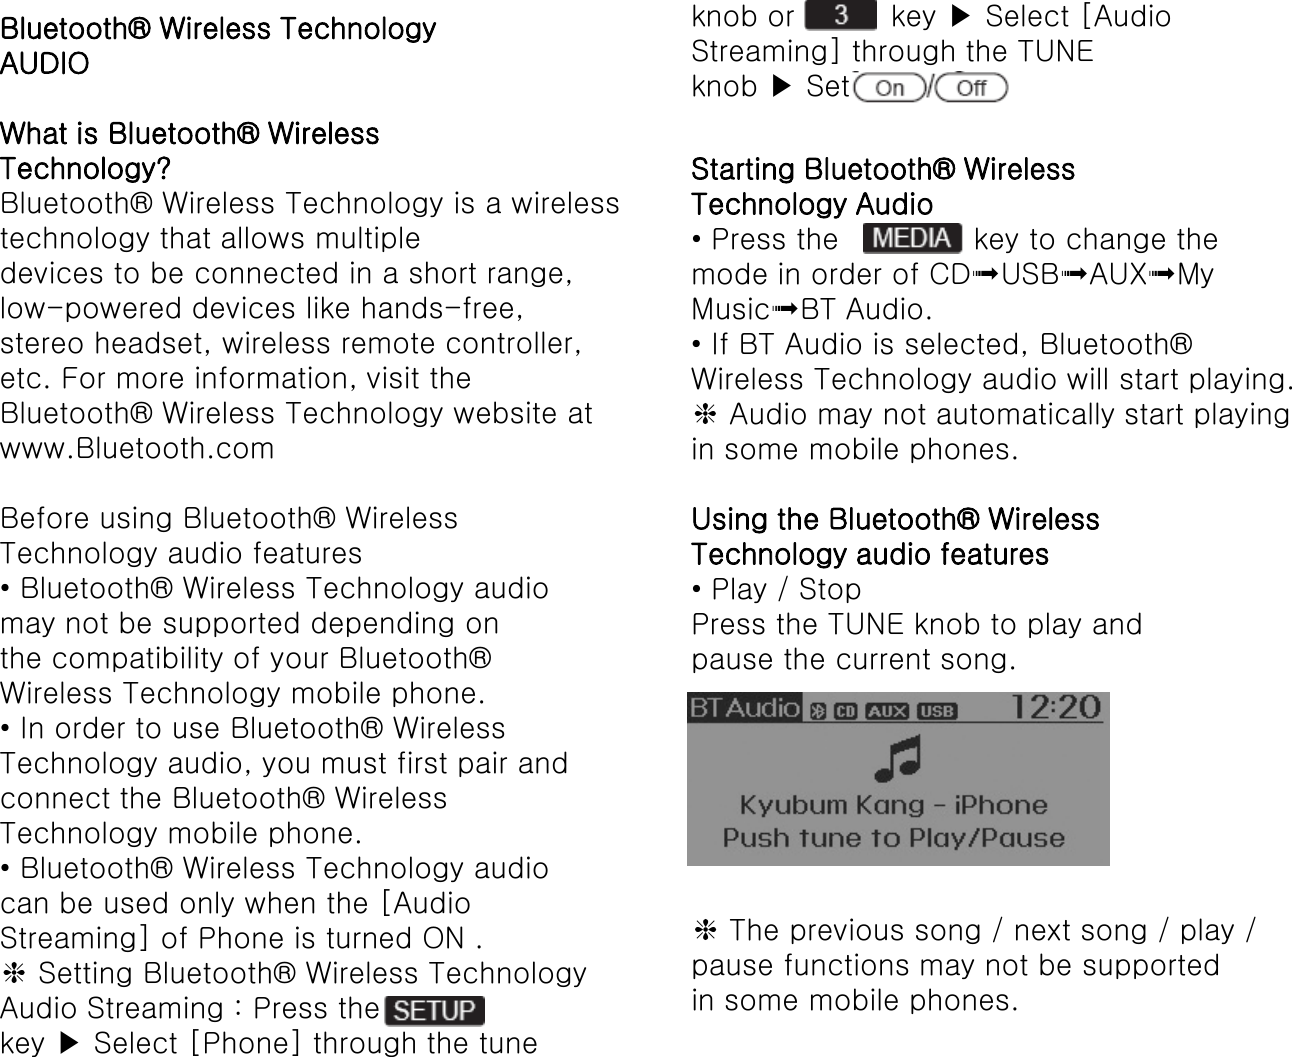 Bluetooth® Wireless TechnologyAUDIOWhat is Bluetooth® WirelessTechnology?Bluetooth® Wireless Technology is a wirelesstechnology that allows multipledevices to be connected in a short range,low-powered devices like hands-free,stereo headset, wireless remote controller,etc. For more information, visit theBluetooth® Wireless Technology website atwww.Bluetooth.comBefore using Bluetooth® WirelessTechnology audio features• Bluetooth® Wireless Technology audiomay not be supported depending onthe compatibility of your Bluetooth®Wireless Technology mobile phone.• In order to use Bluetooth® WirelessTechnology audio, you must first pair andconnect the Bluetooth® WirelessTechnology mobile phone.• Bluetooth® Wireless Technology audiocan be used only when the [AudioStreaming] of Phone is turned ON .❈Setting Bluetooth® Wireless TechnologyAudio Streaming : Press the key ▶Select [Phone] through the tuneknob or          key ▶ Select [AudioStreaming] through the TUNEknob ▶SetStarting Bluetooth® WirelessTechnology Audio• Press the              key to change themode in order of CD➟USB➟AUX➟MyMusic➟BT Audio.• If BT Audio is selected, Bluetooth®Wireless Technology audio will start playing.❈Audio may not automatically start playingin some mobile phones.Using the Bluetooth® WirelessTechnology audio features• Play / StopPress the TUNE knob to play andpause the current song.❈The previous song / next song / play /pause functions may not be supportedin some mobile phones.